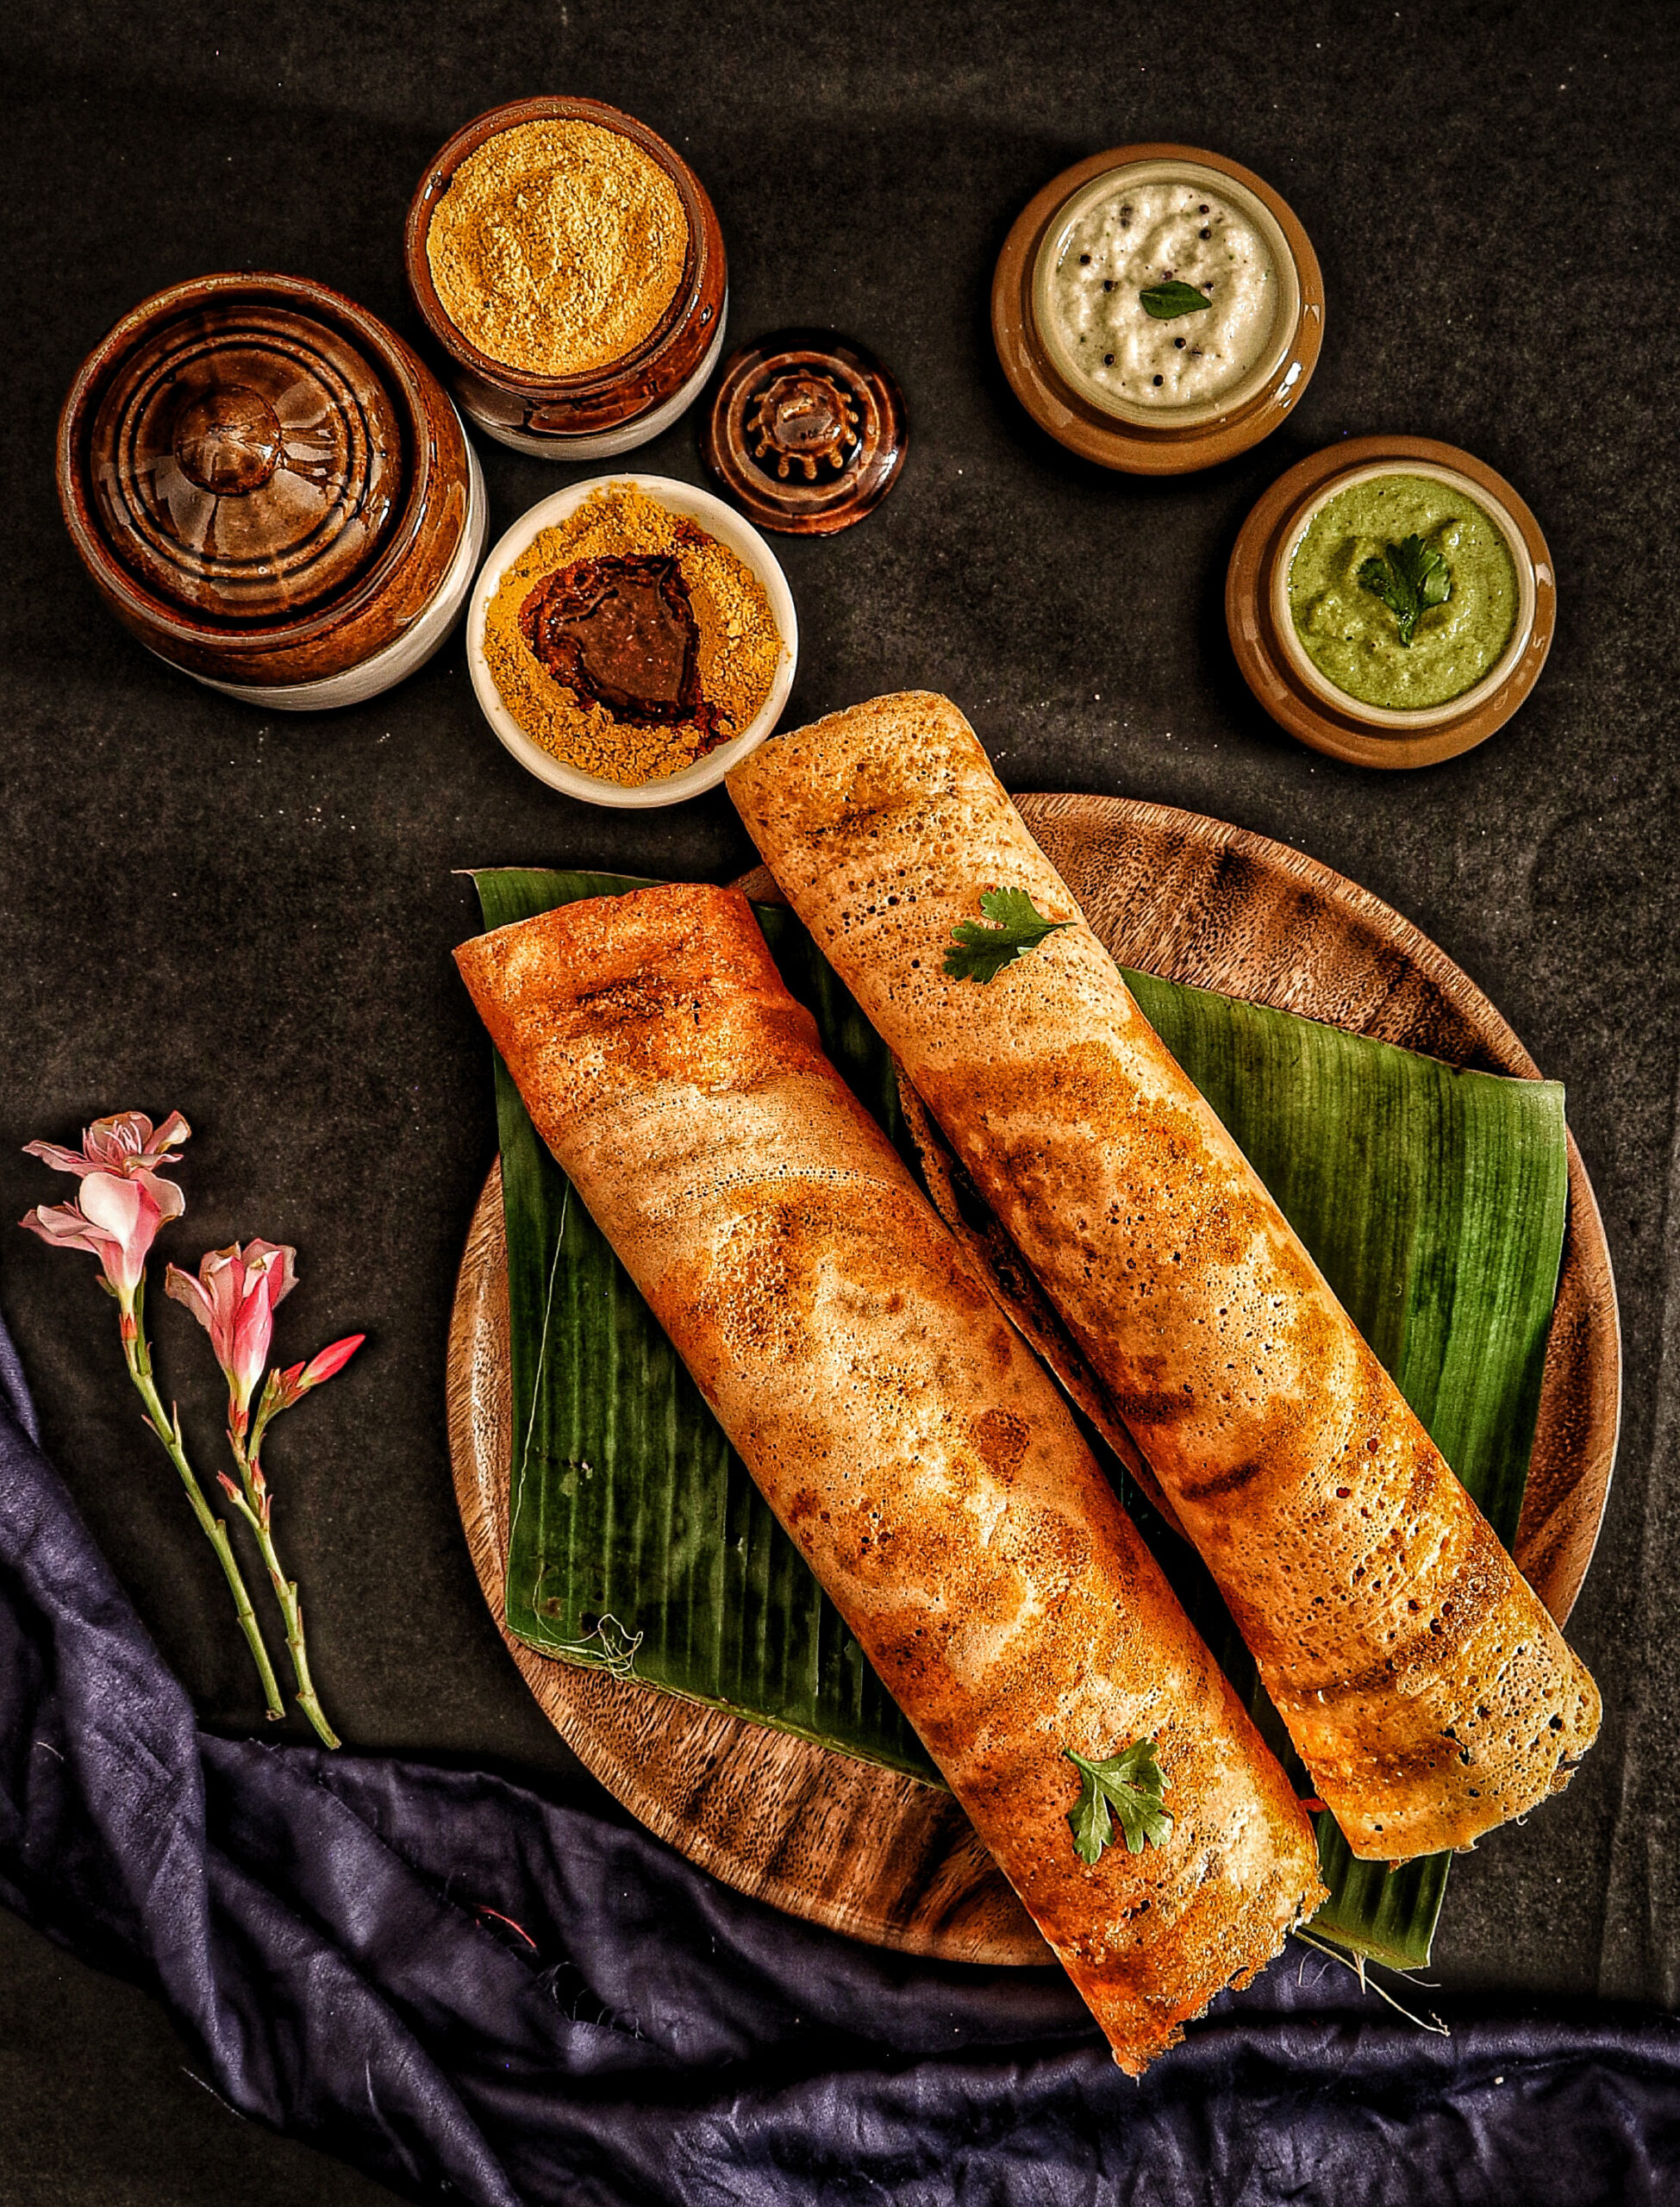 Best South Indian Food Near Me